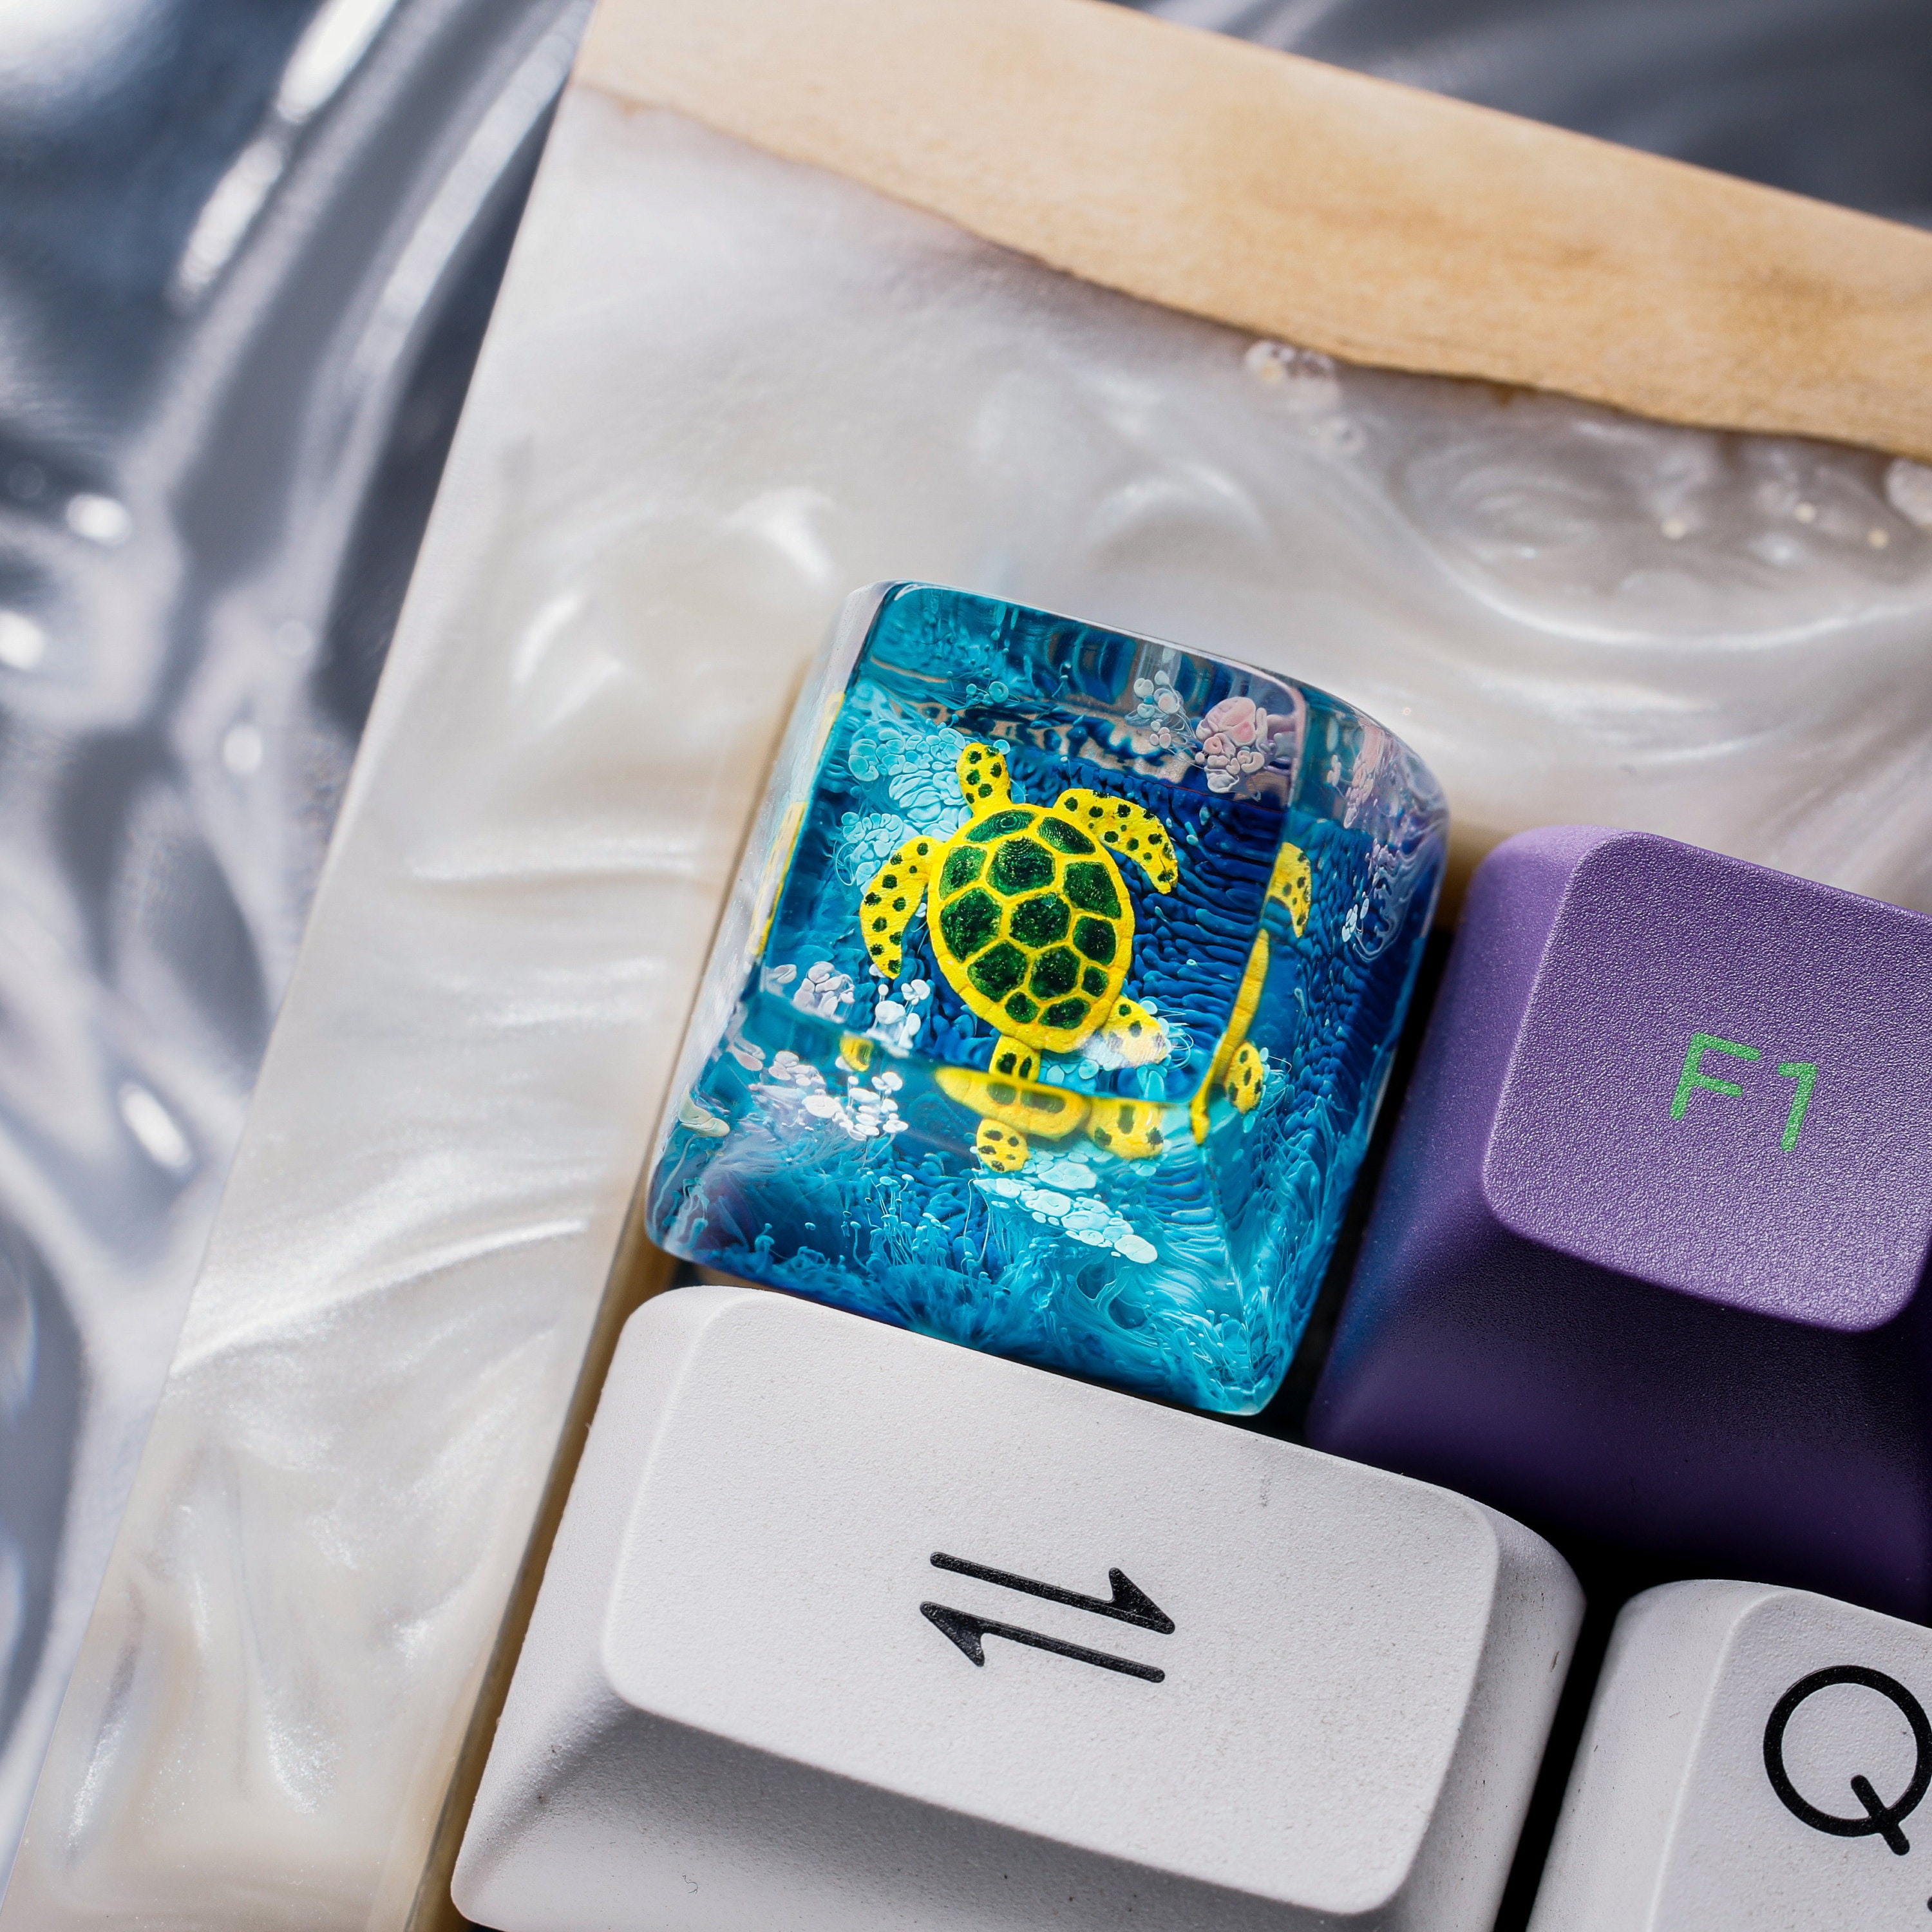 Turtle Keycap, Blue Coral, SA Profile Keycap, Keycap for MX Cherry Switches Michanical Keyboard, Handmade Gift